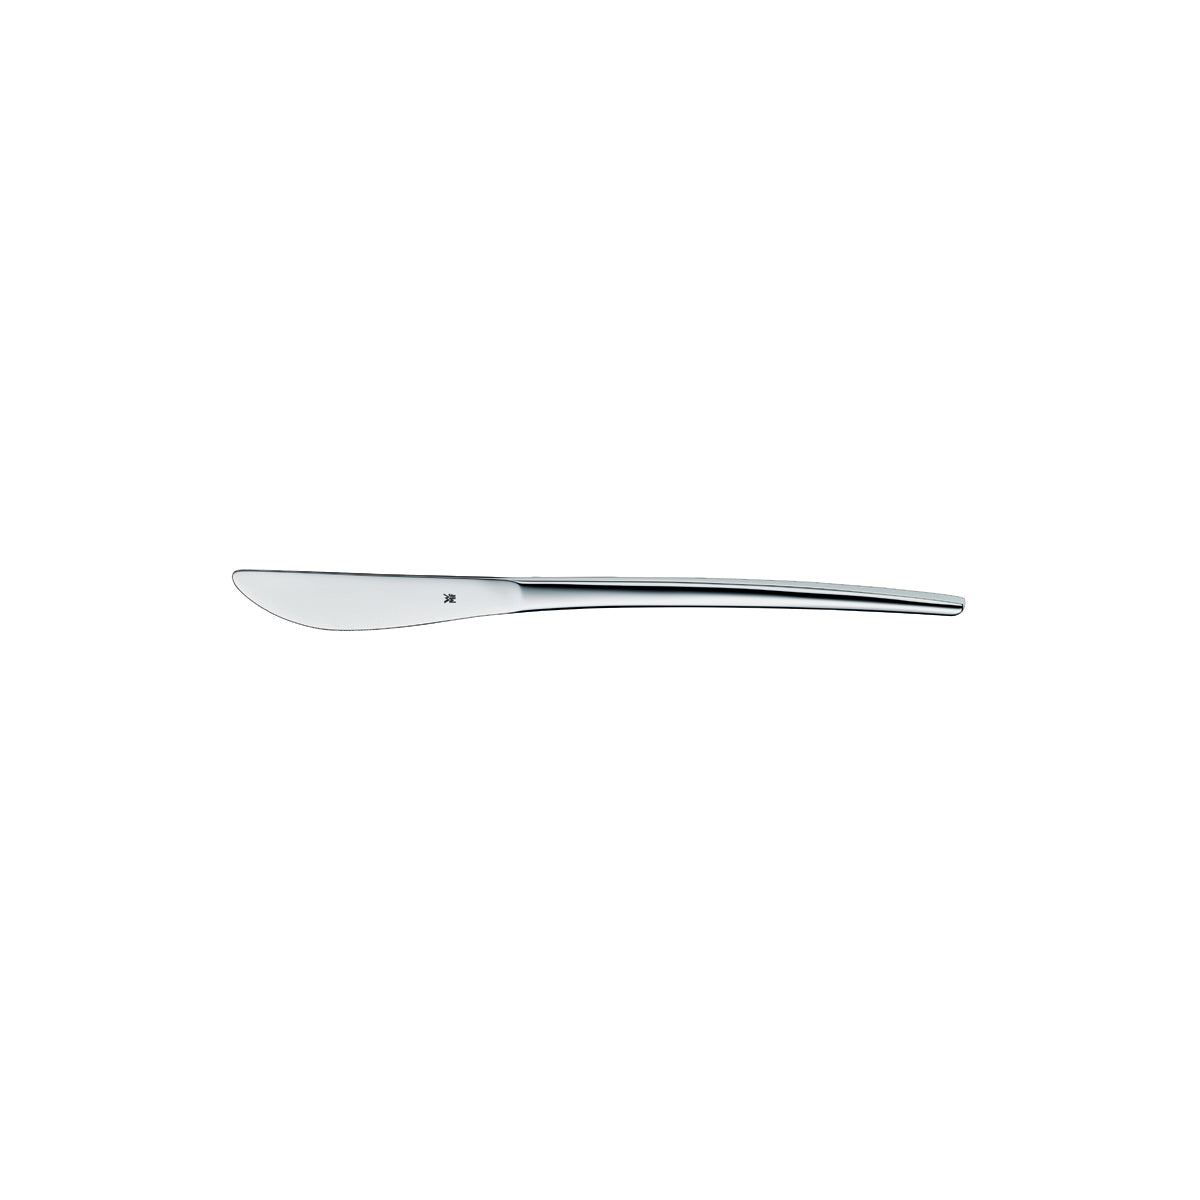 54.7203.6049 WMF Nordic Table Knife Stainless Steel Tomkin Australia Hospitality Supplies